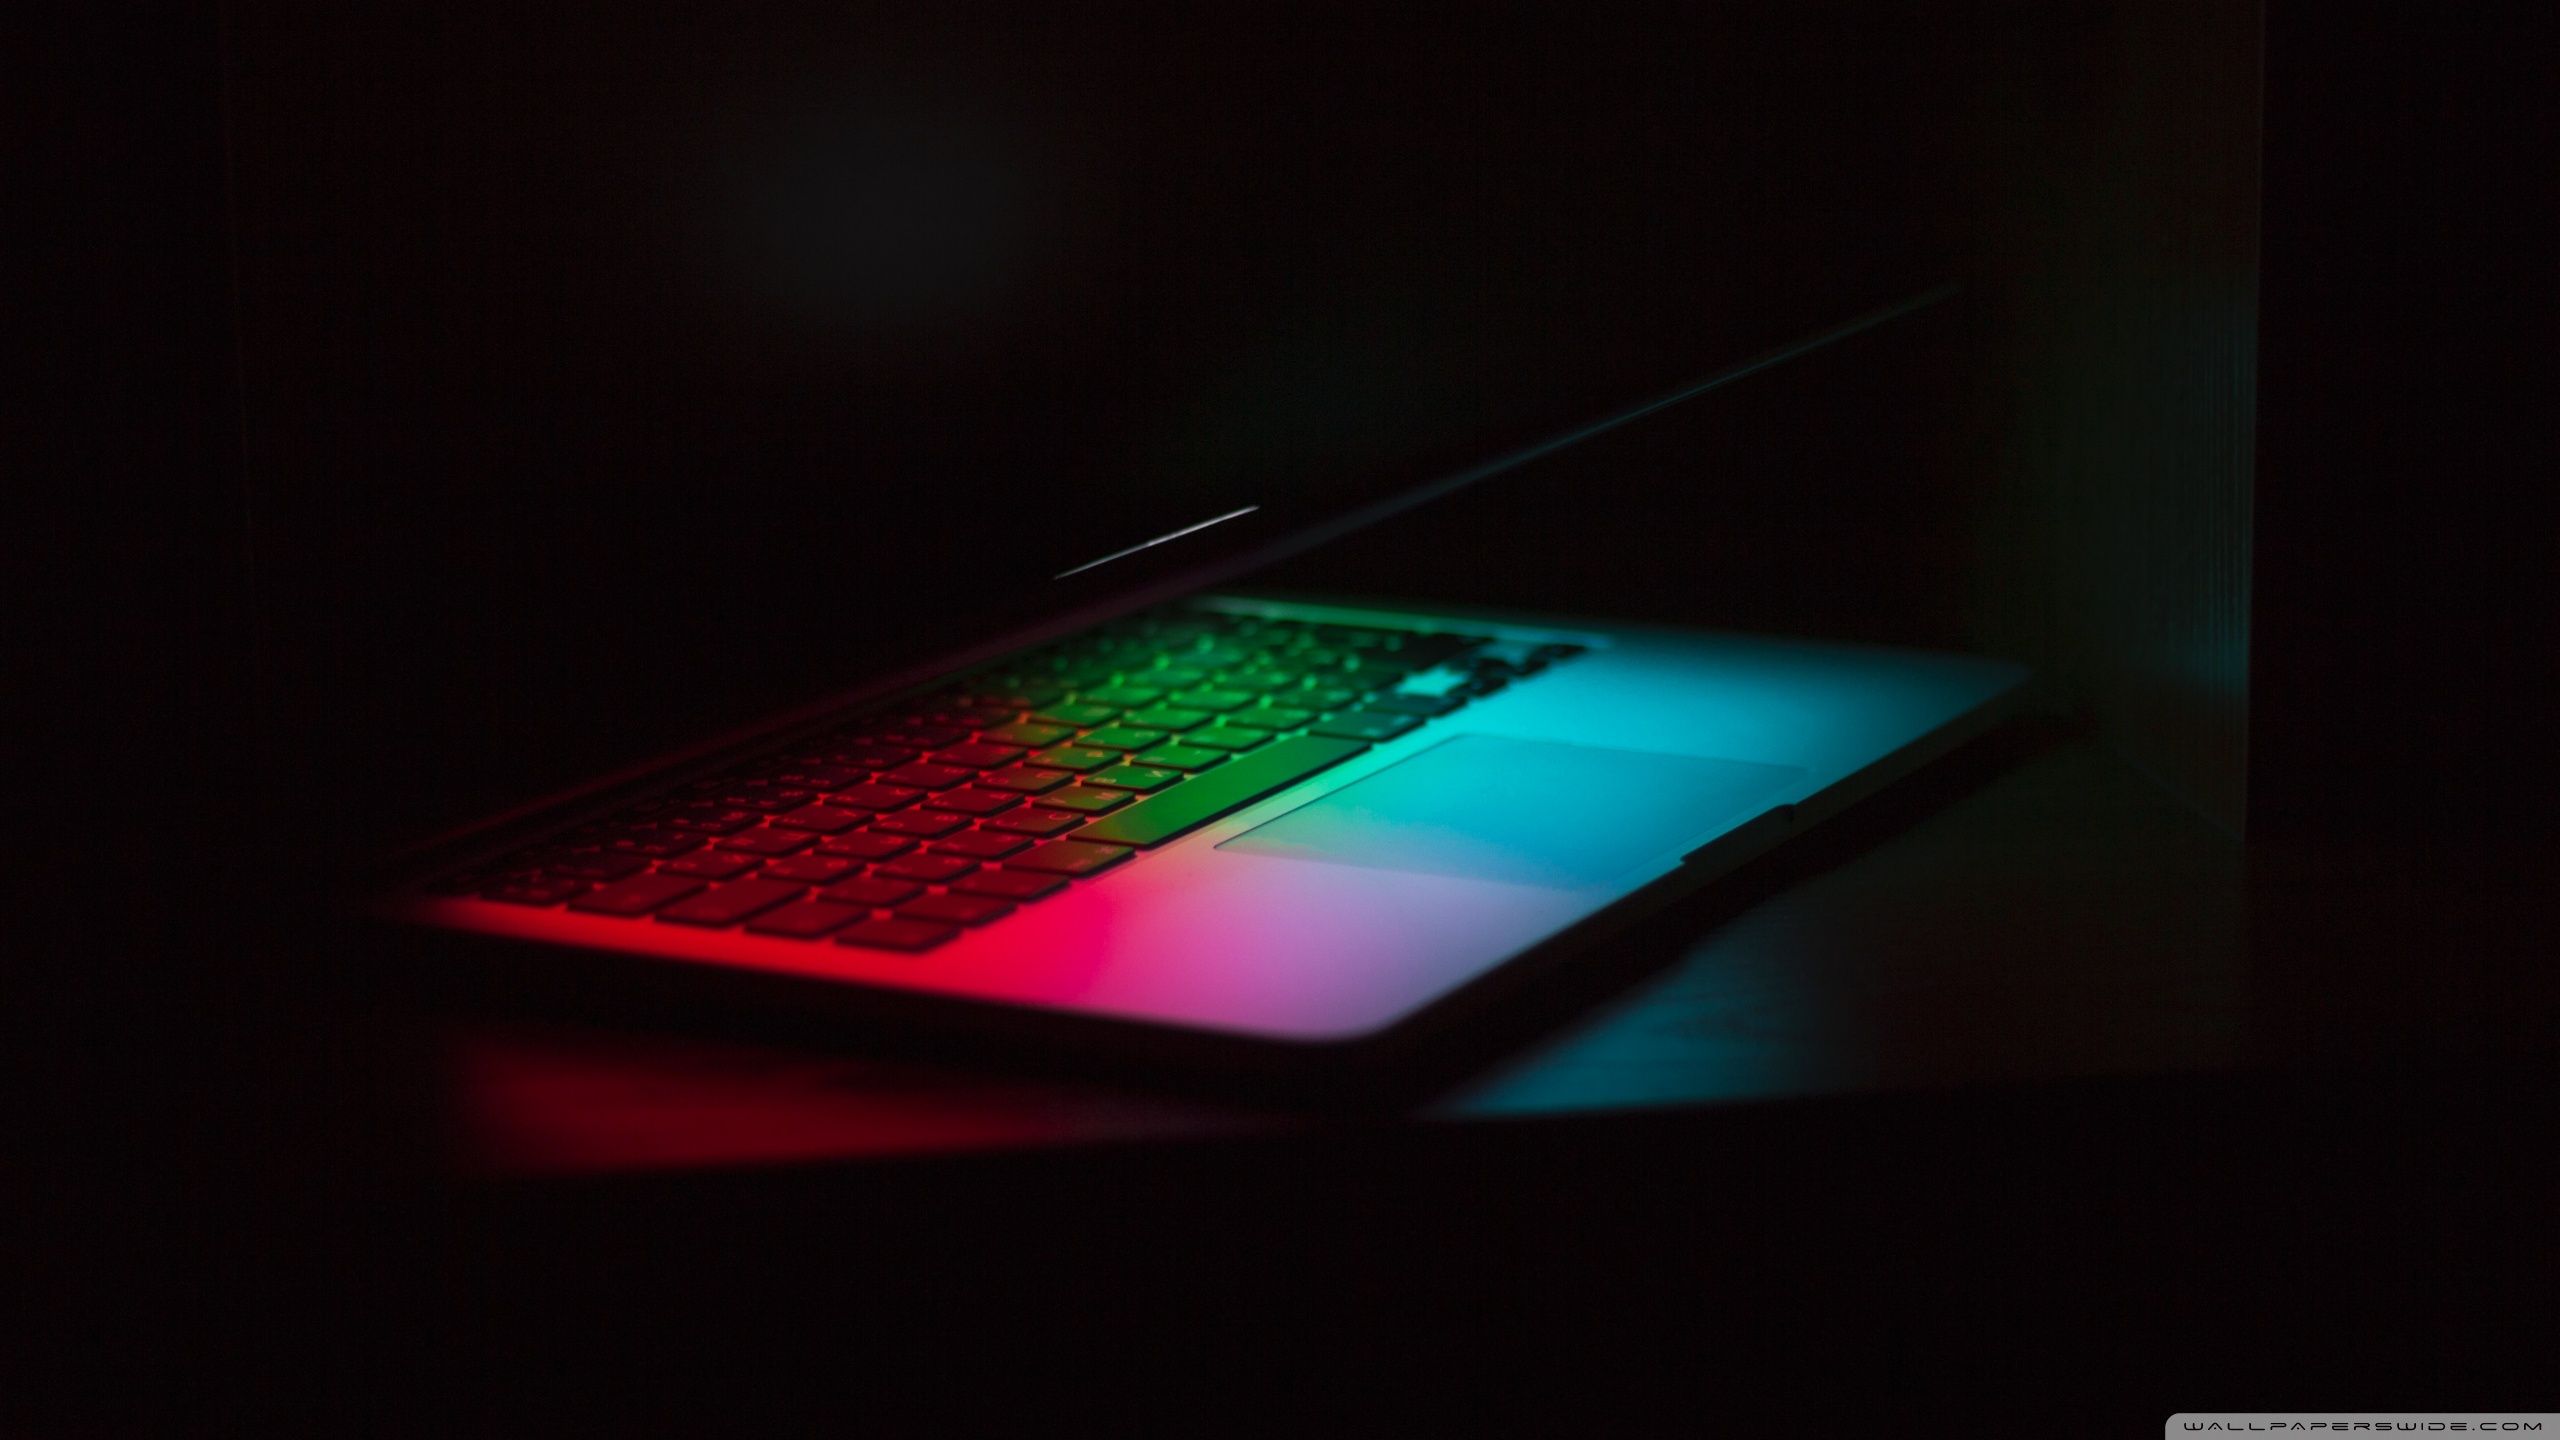 A laptop with a colorful keyboard in the dark - Laptop